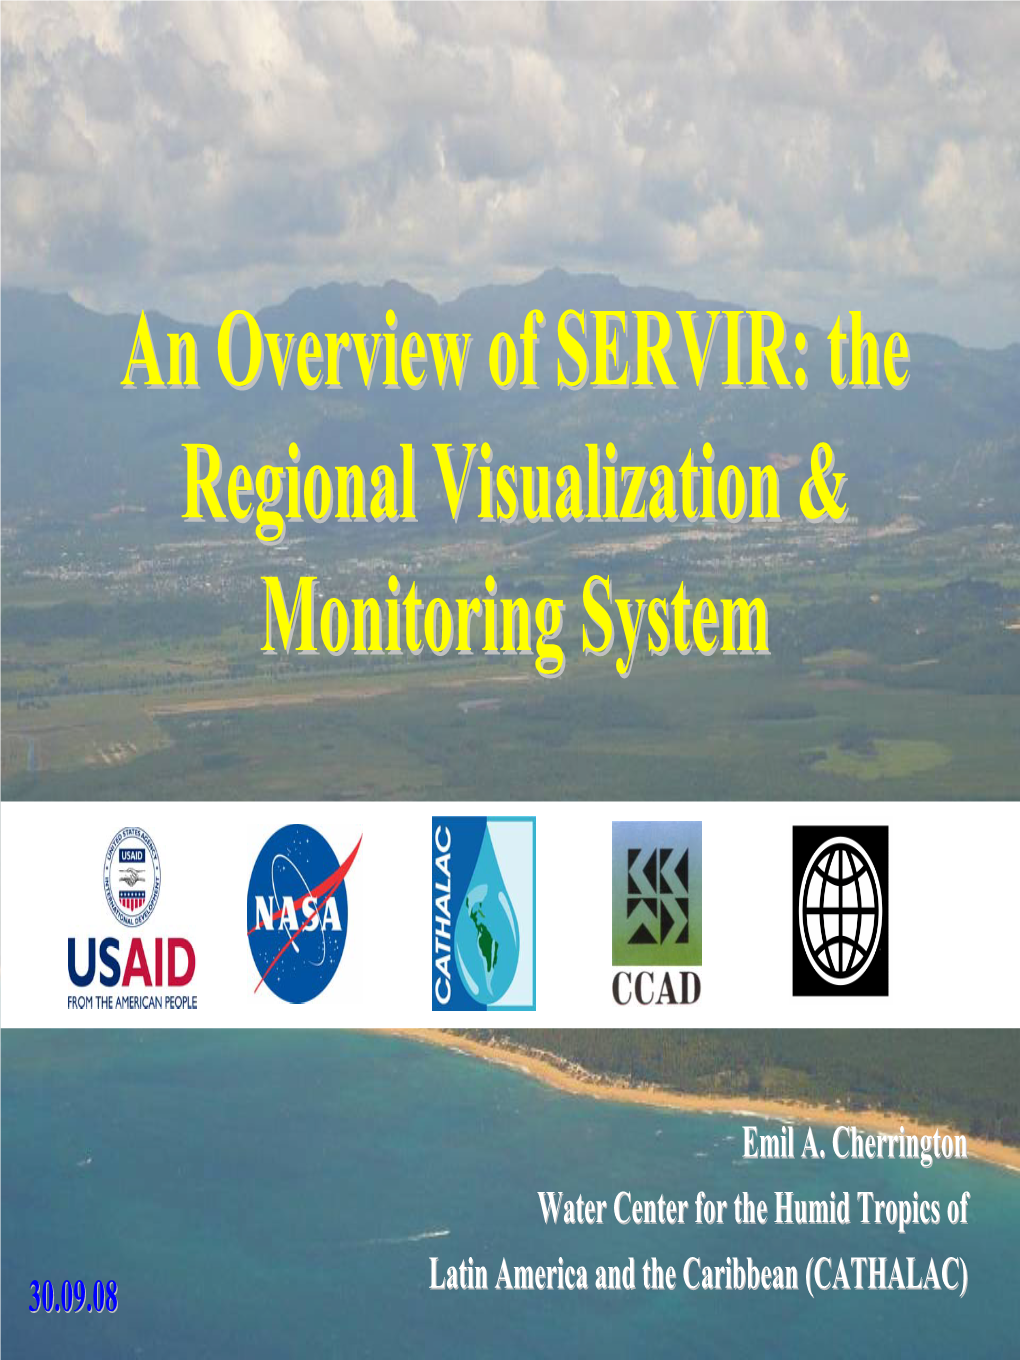 An Overview of SERVIR: the Regional Visualization